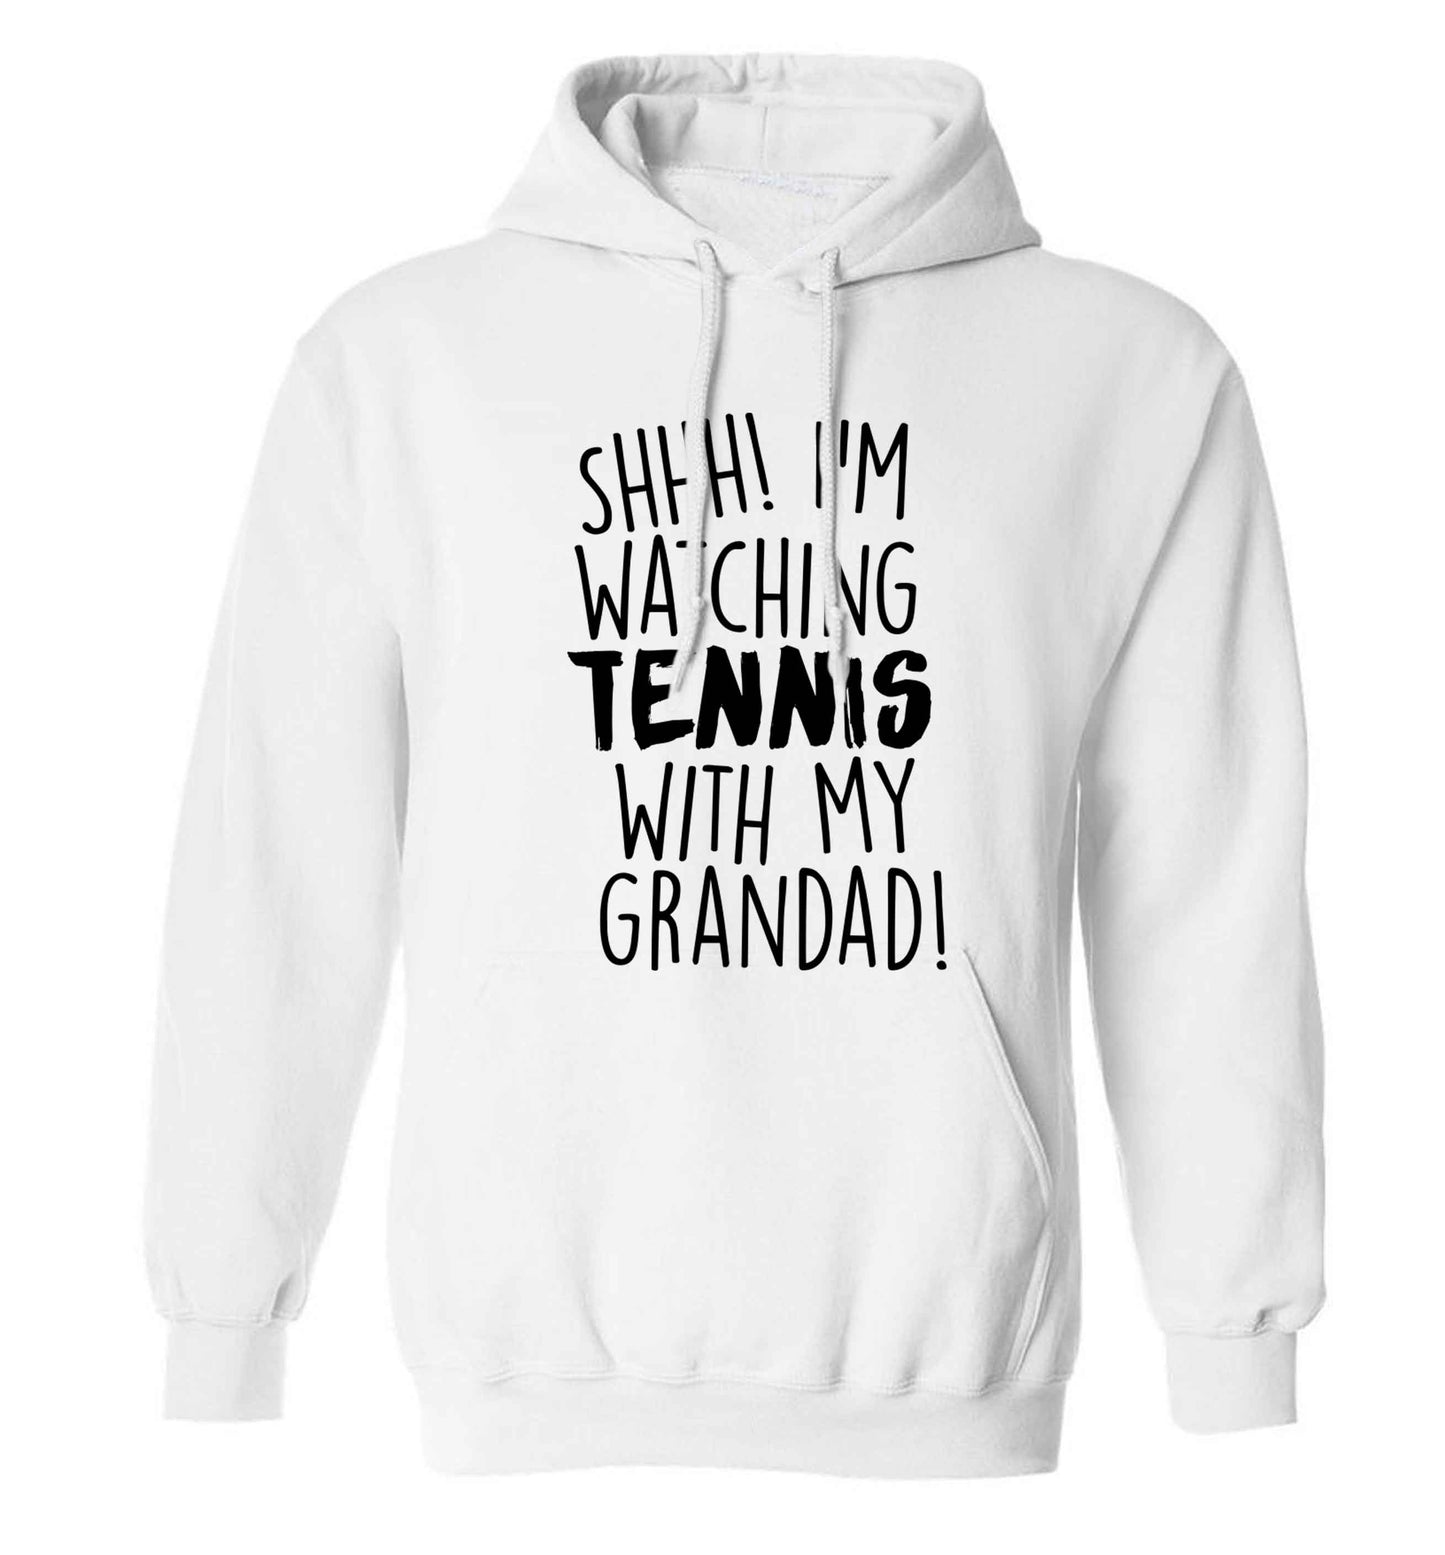 Shh! I'm watching tennis with my grandad! adults unisex white hoodie 2XL